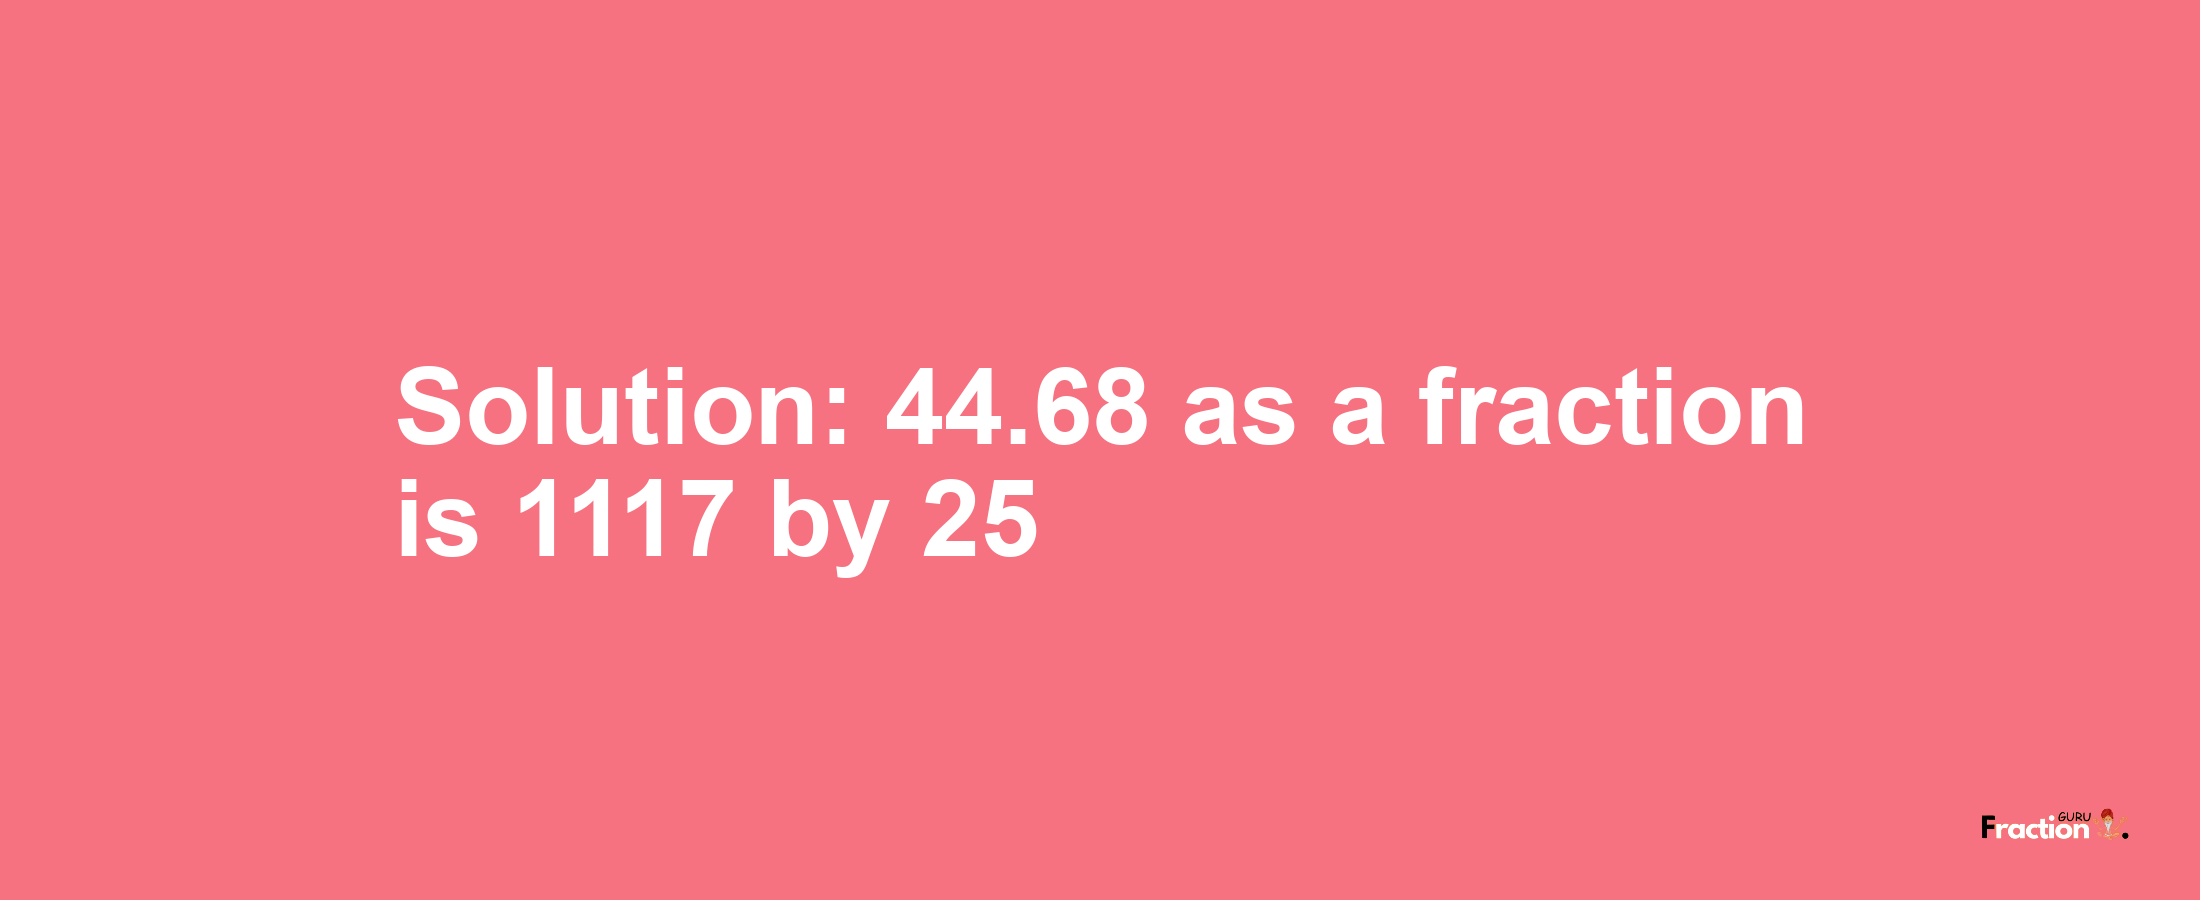 Solution:44.68 as a fraction is 1117/25